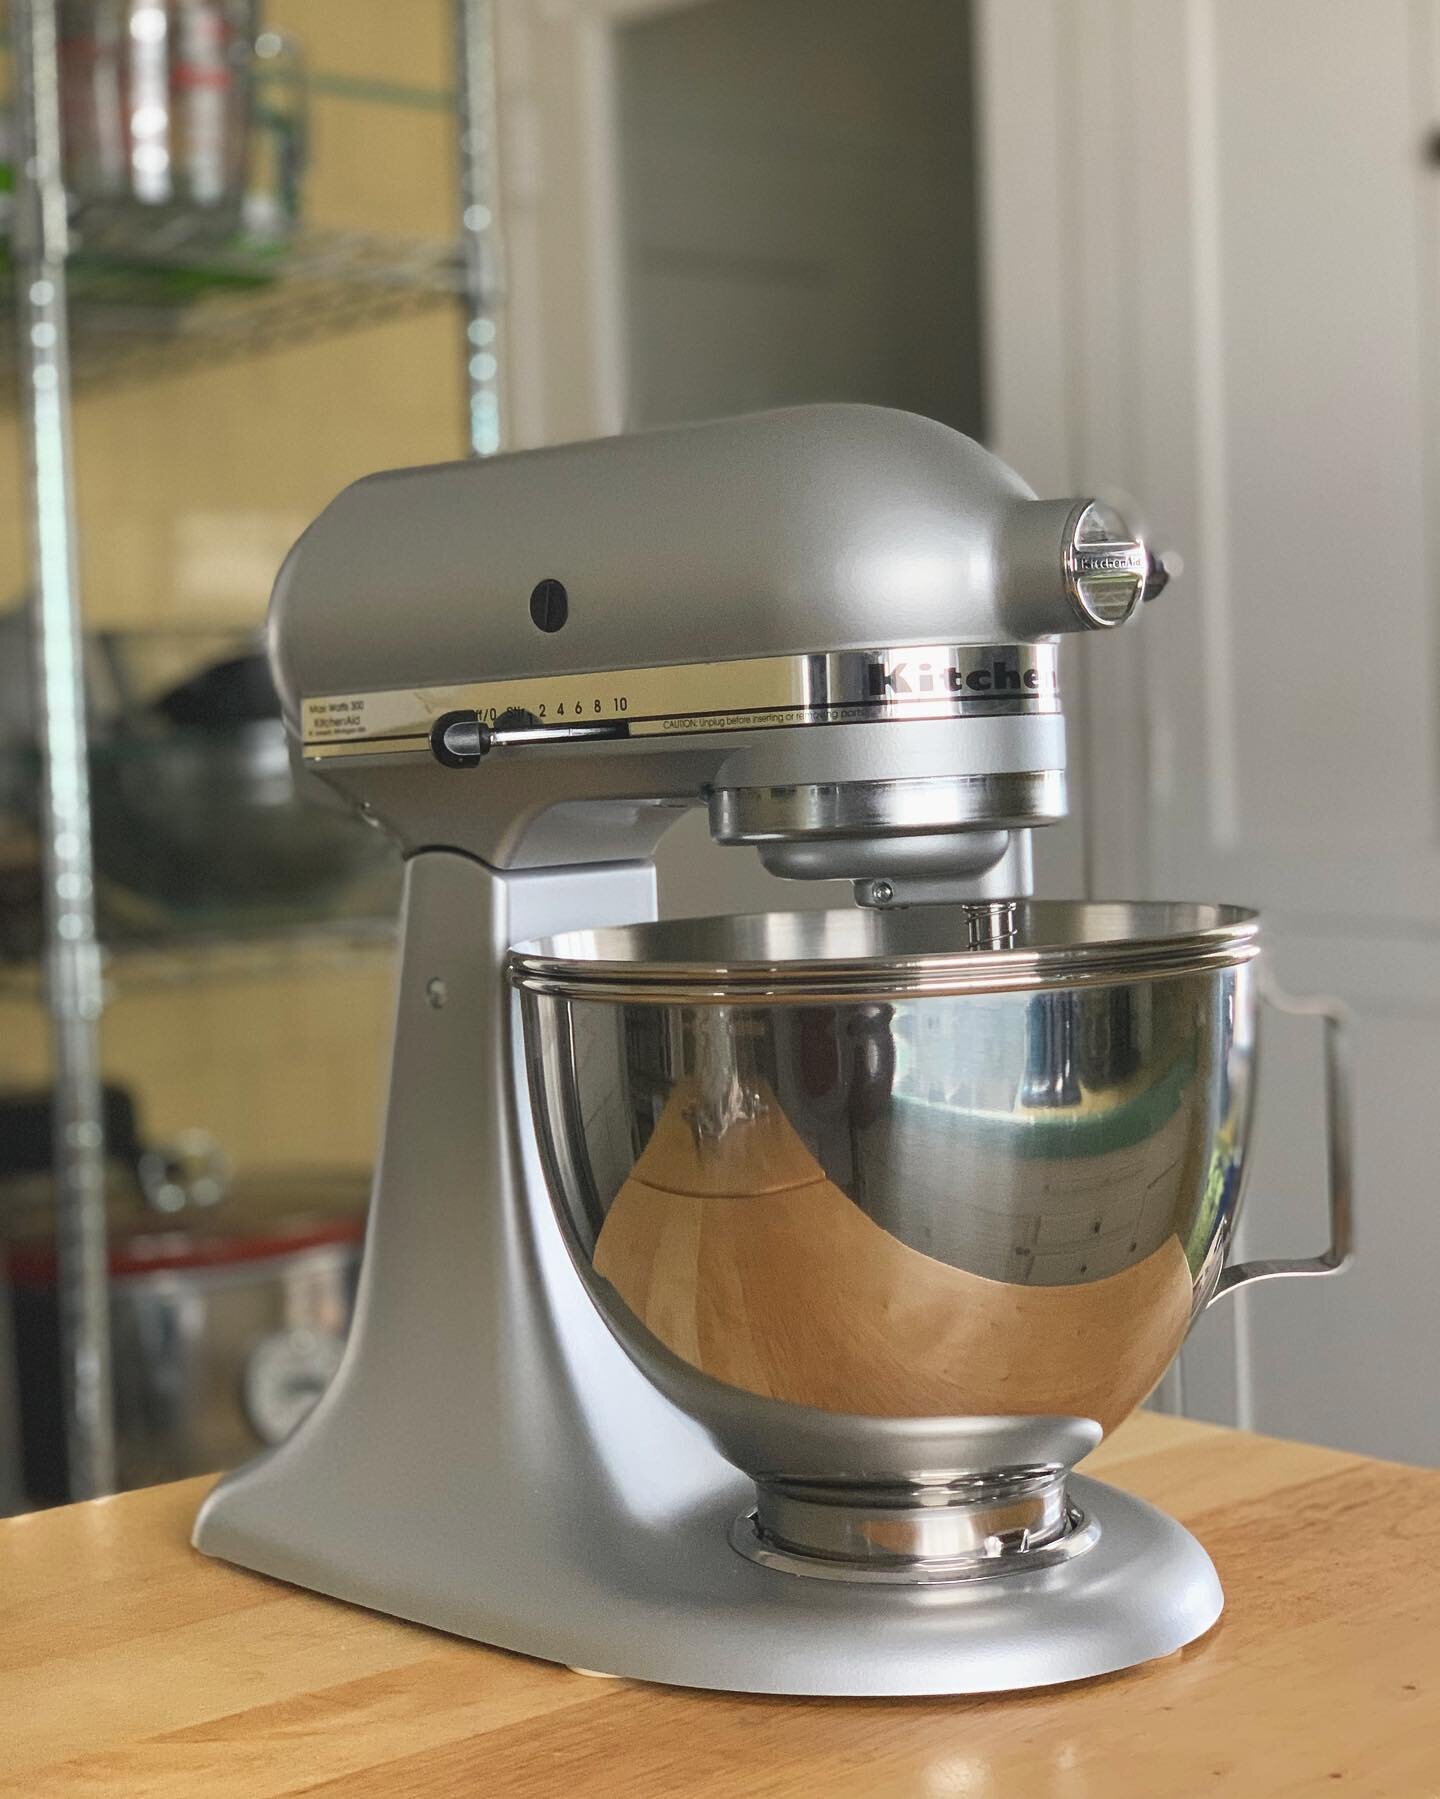 I call this a moment of triumph! After 5 long years of begging, my Mom finally broke down and gave me this gorgeous chrome @kitchenaidusa stand mixer that&rsquo;s just been sitting in her entryway closet unopened since she bought it. I&rsquo;m about 